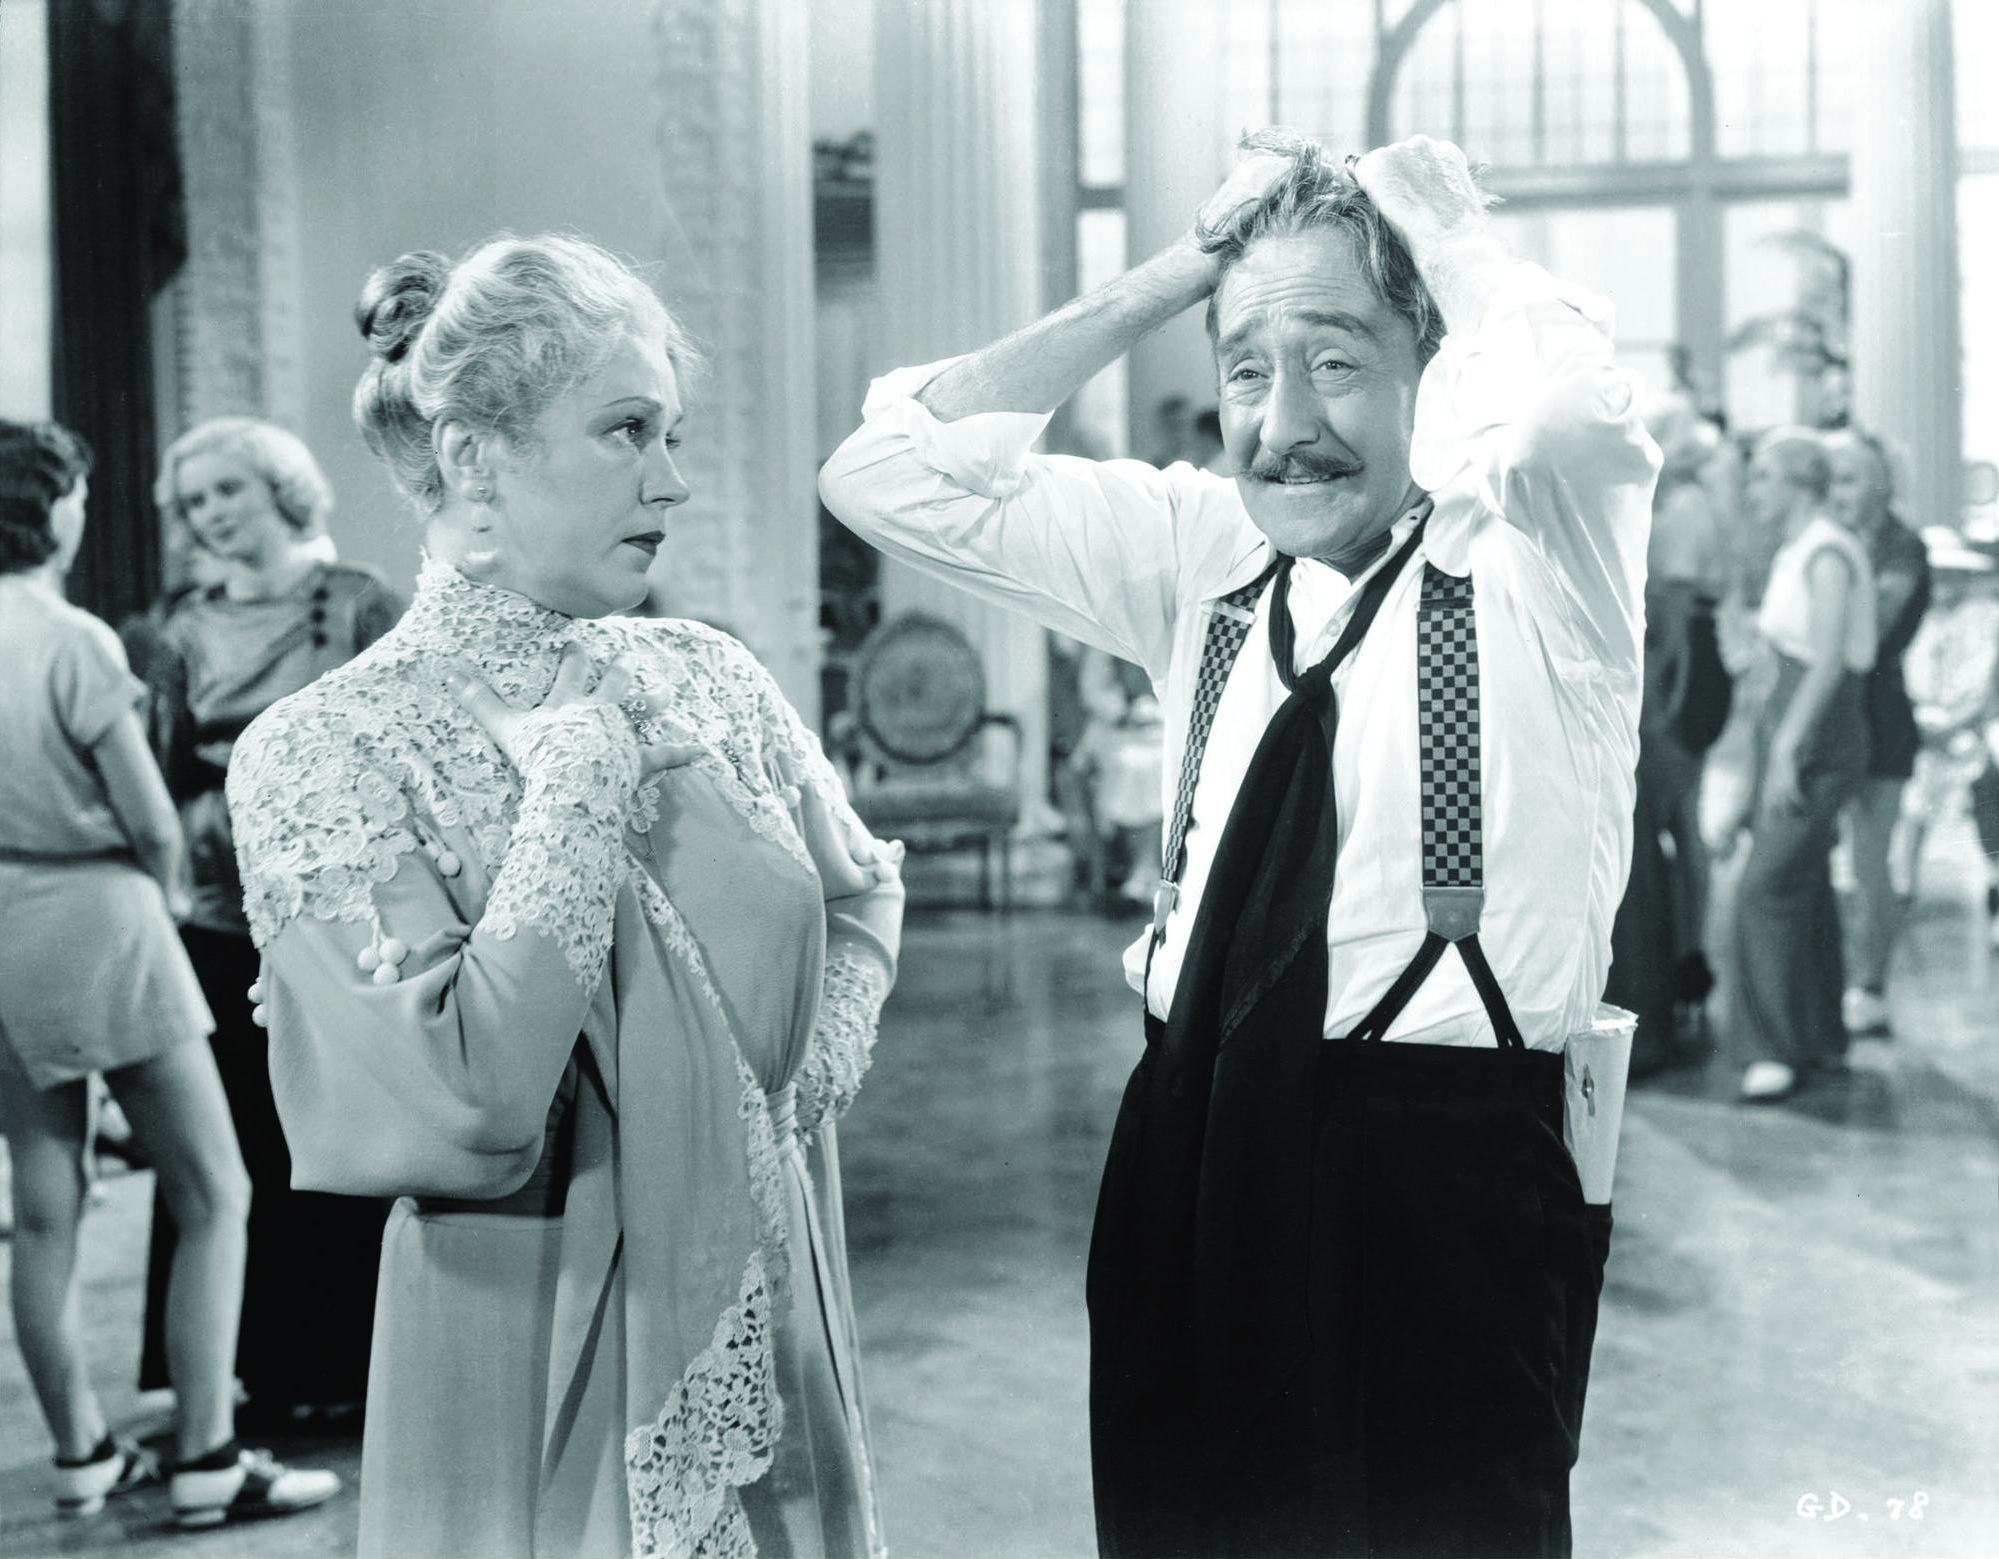 Still of Alice Brady and Adolphe Menjou in Gold Diggers of 1935 (1935)